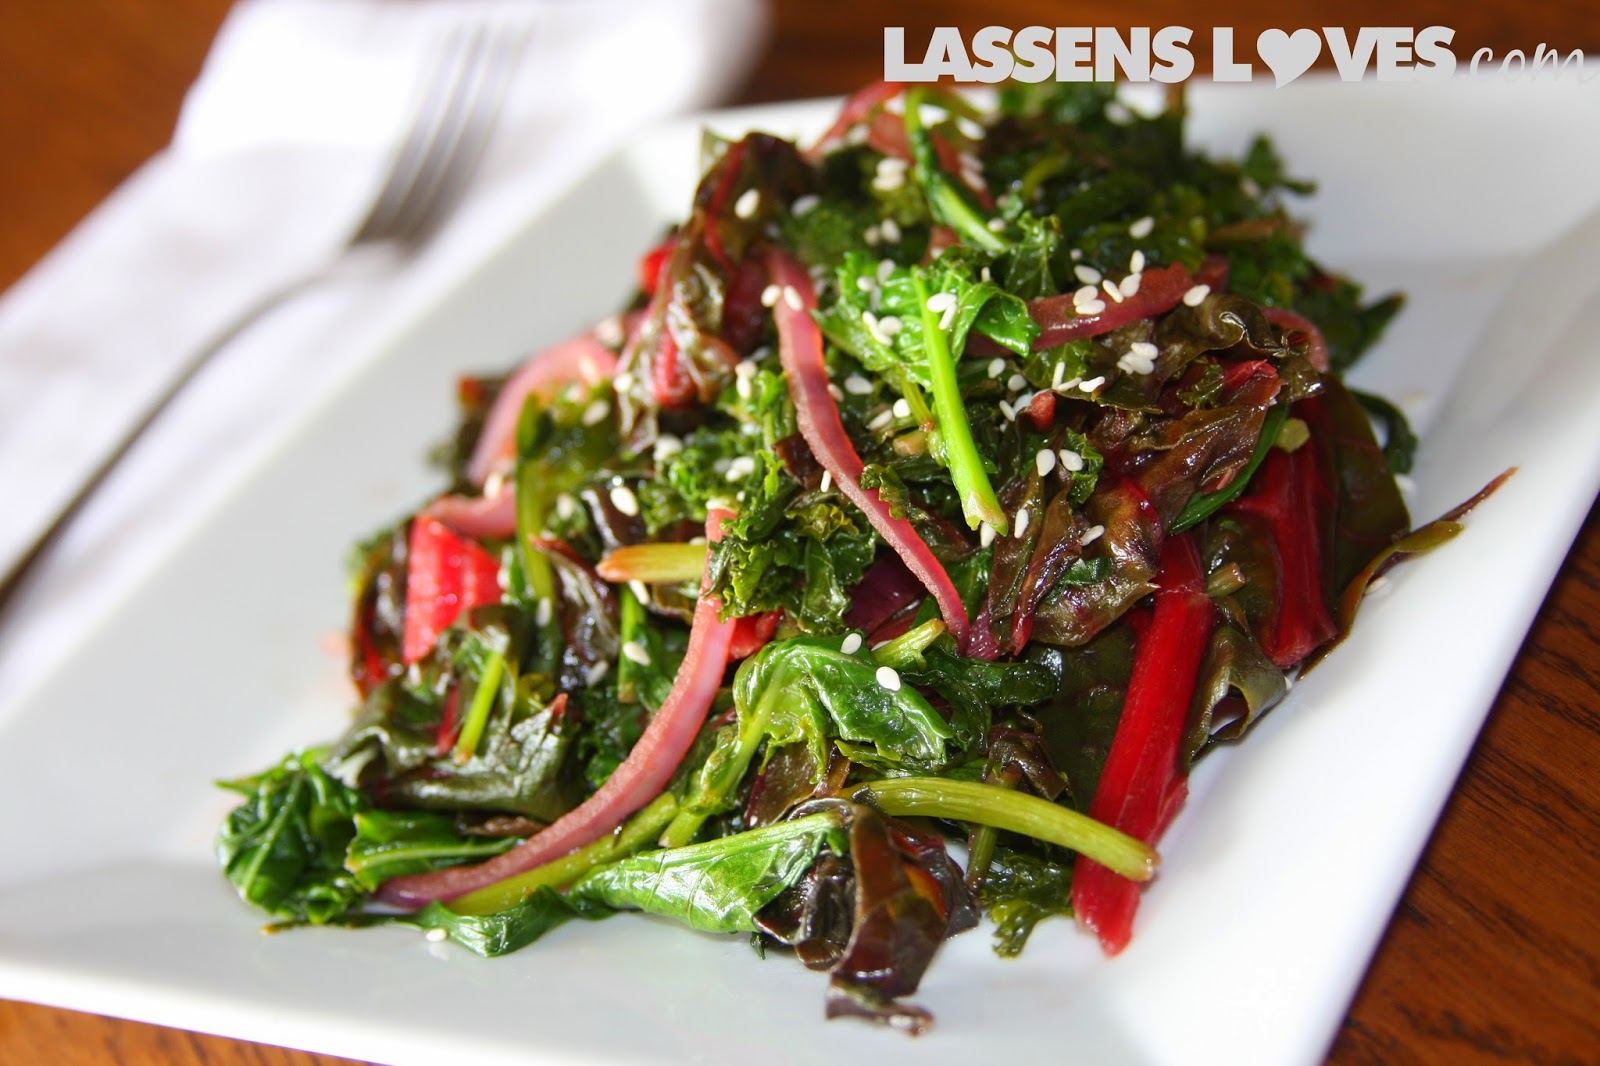 hot+to+cook+greens, healthy+greens, red+chard, dandelion+greens, greens+recipes